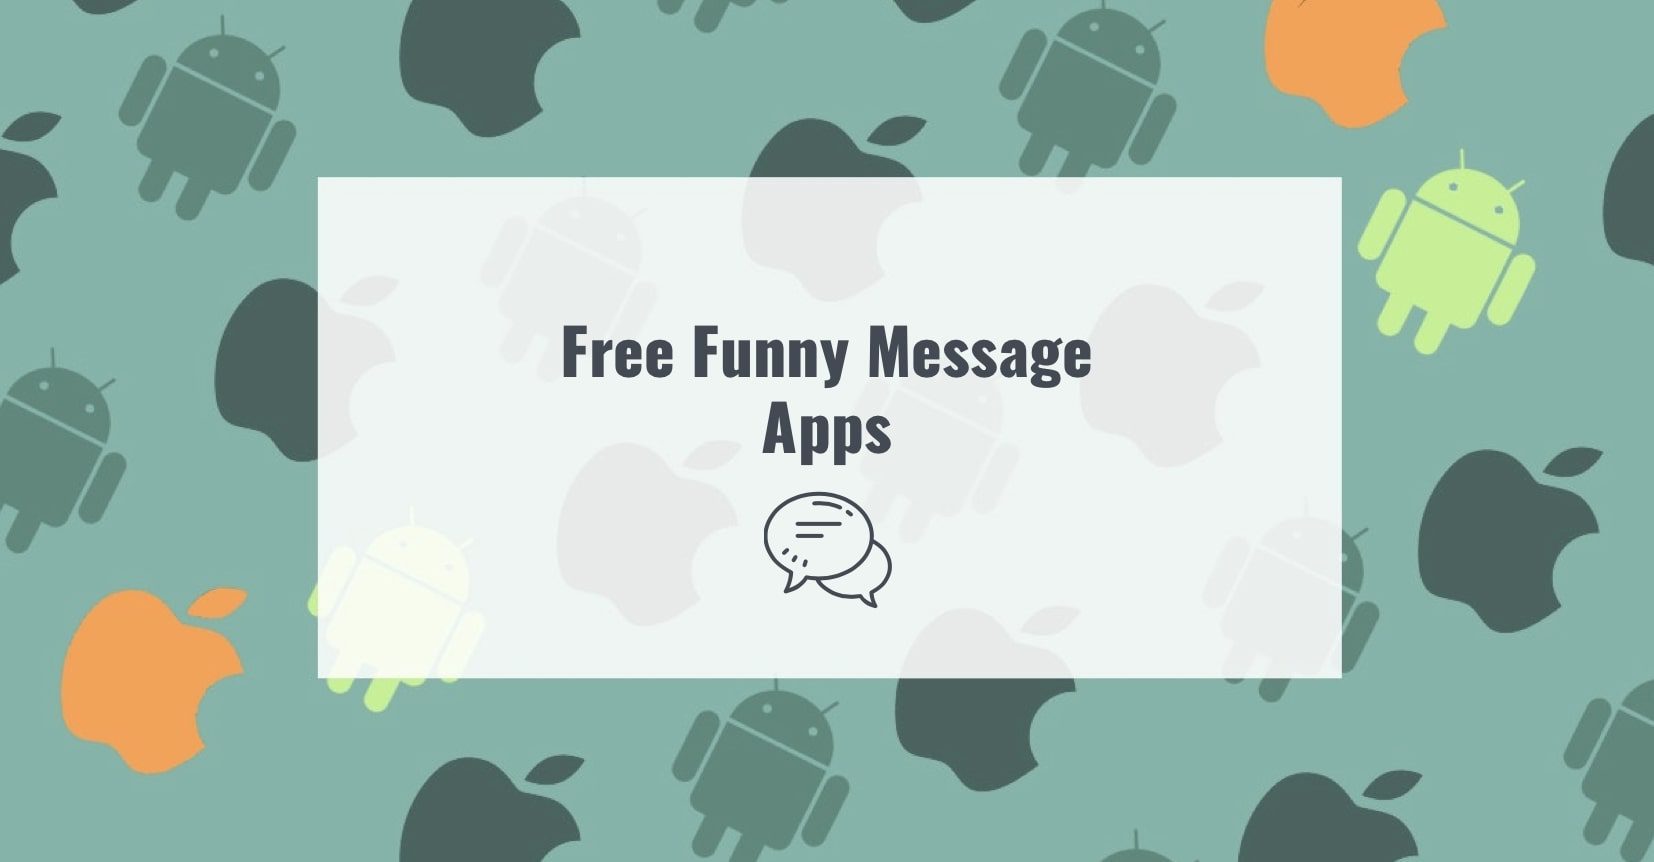 11 Free Funny Message Apps for Android & iOS - Apps Like These. Best Apps  for Android, iOS, and Windows PC